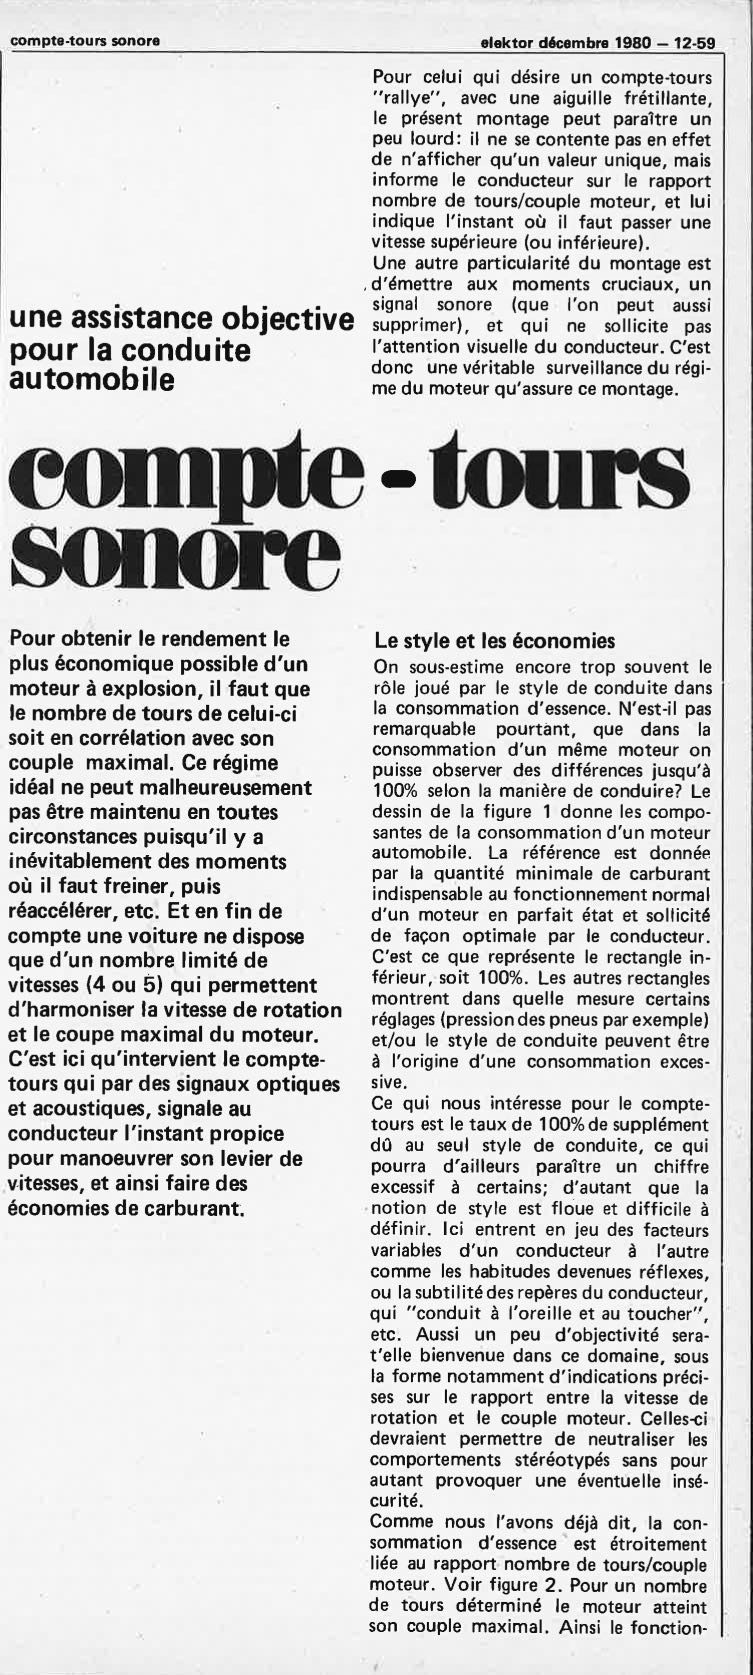 compte-tours sonore